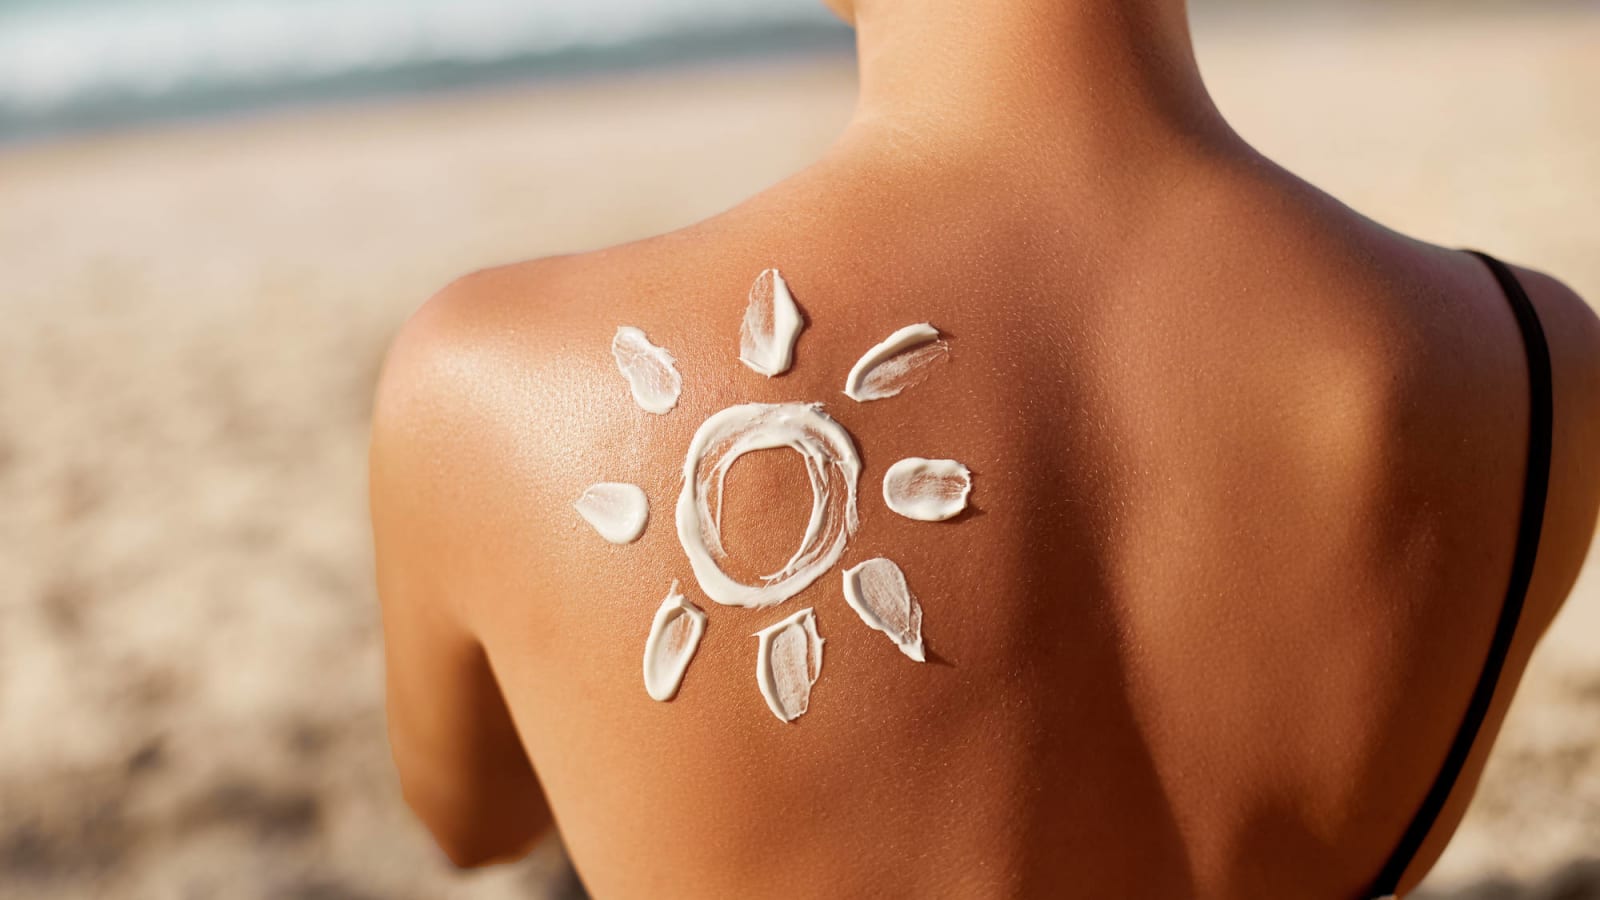 The dos and don'ts of wearing sunscreen